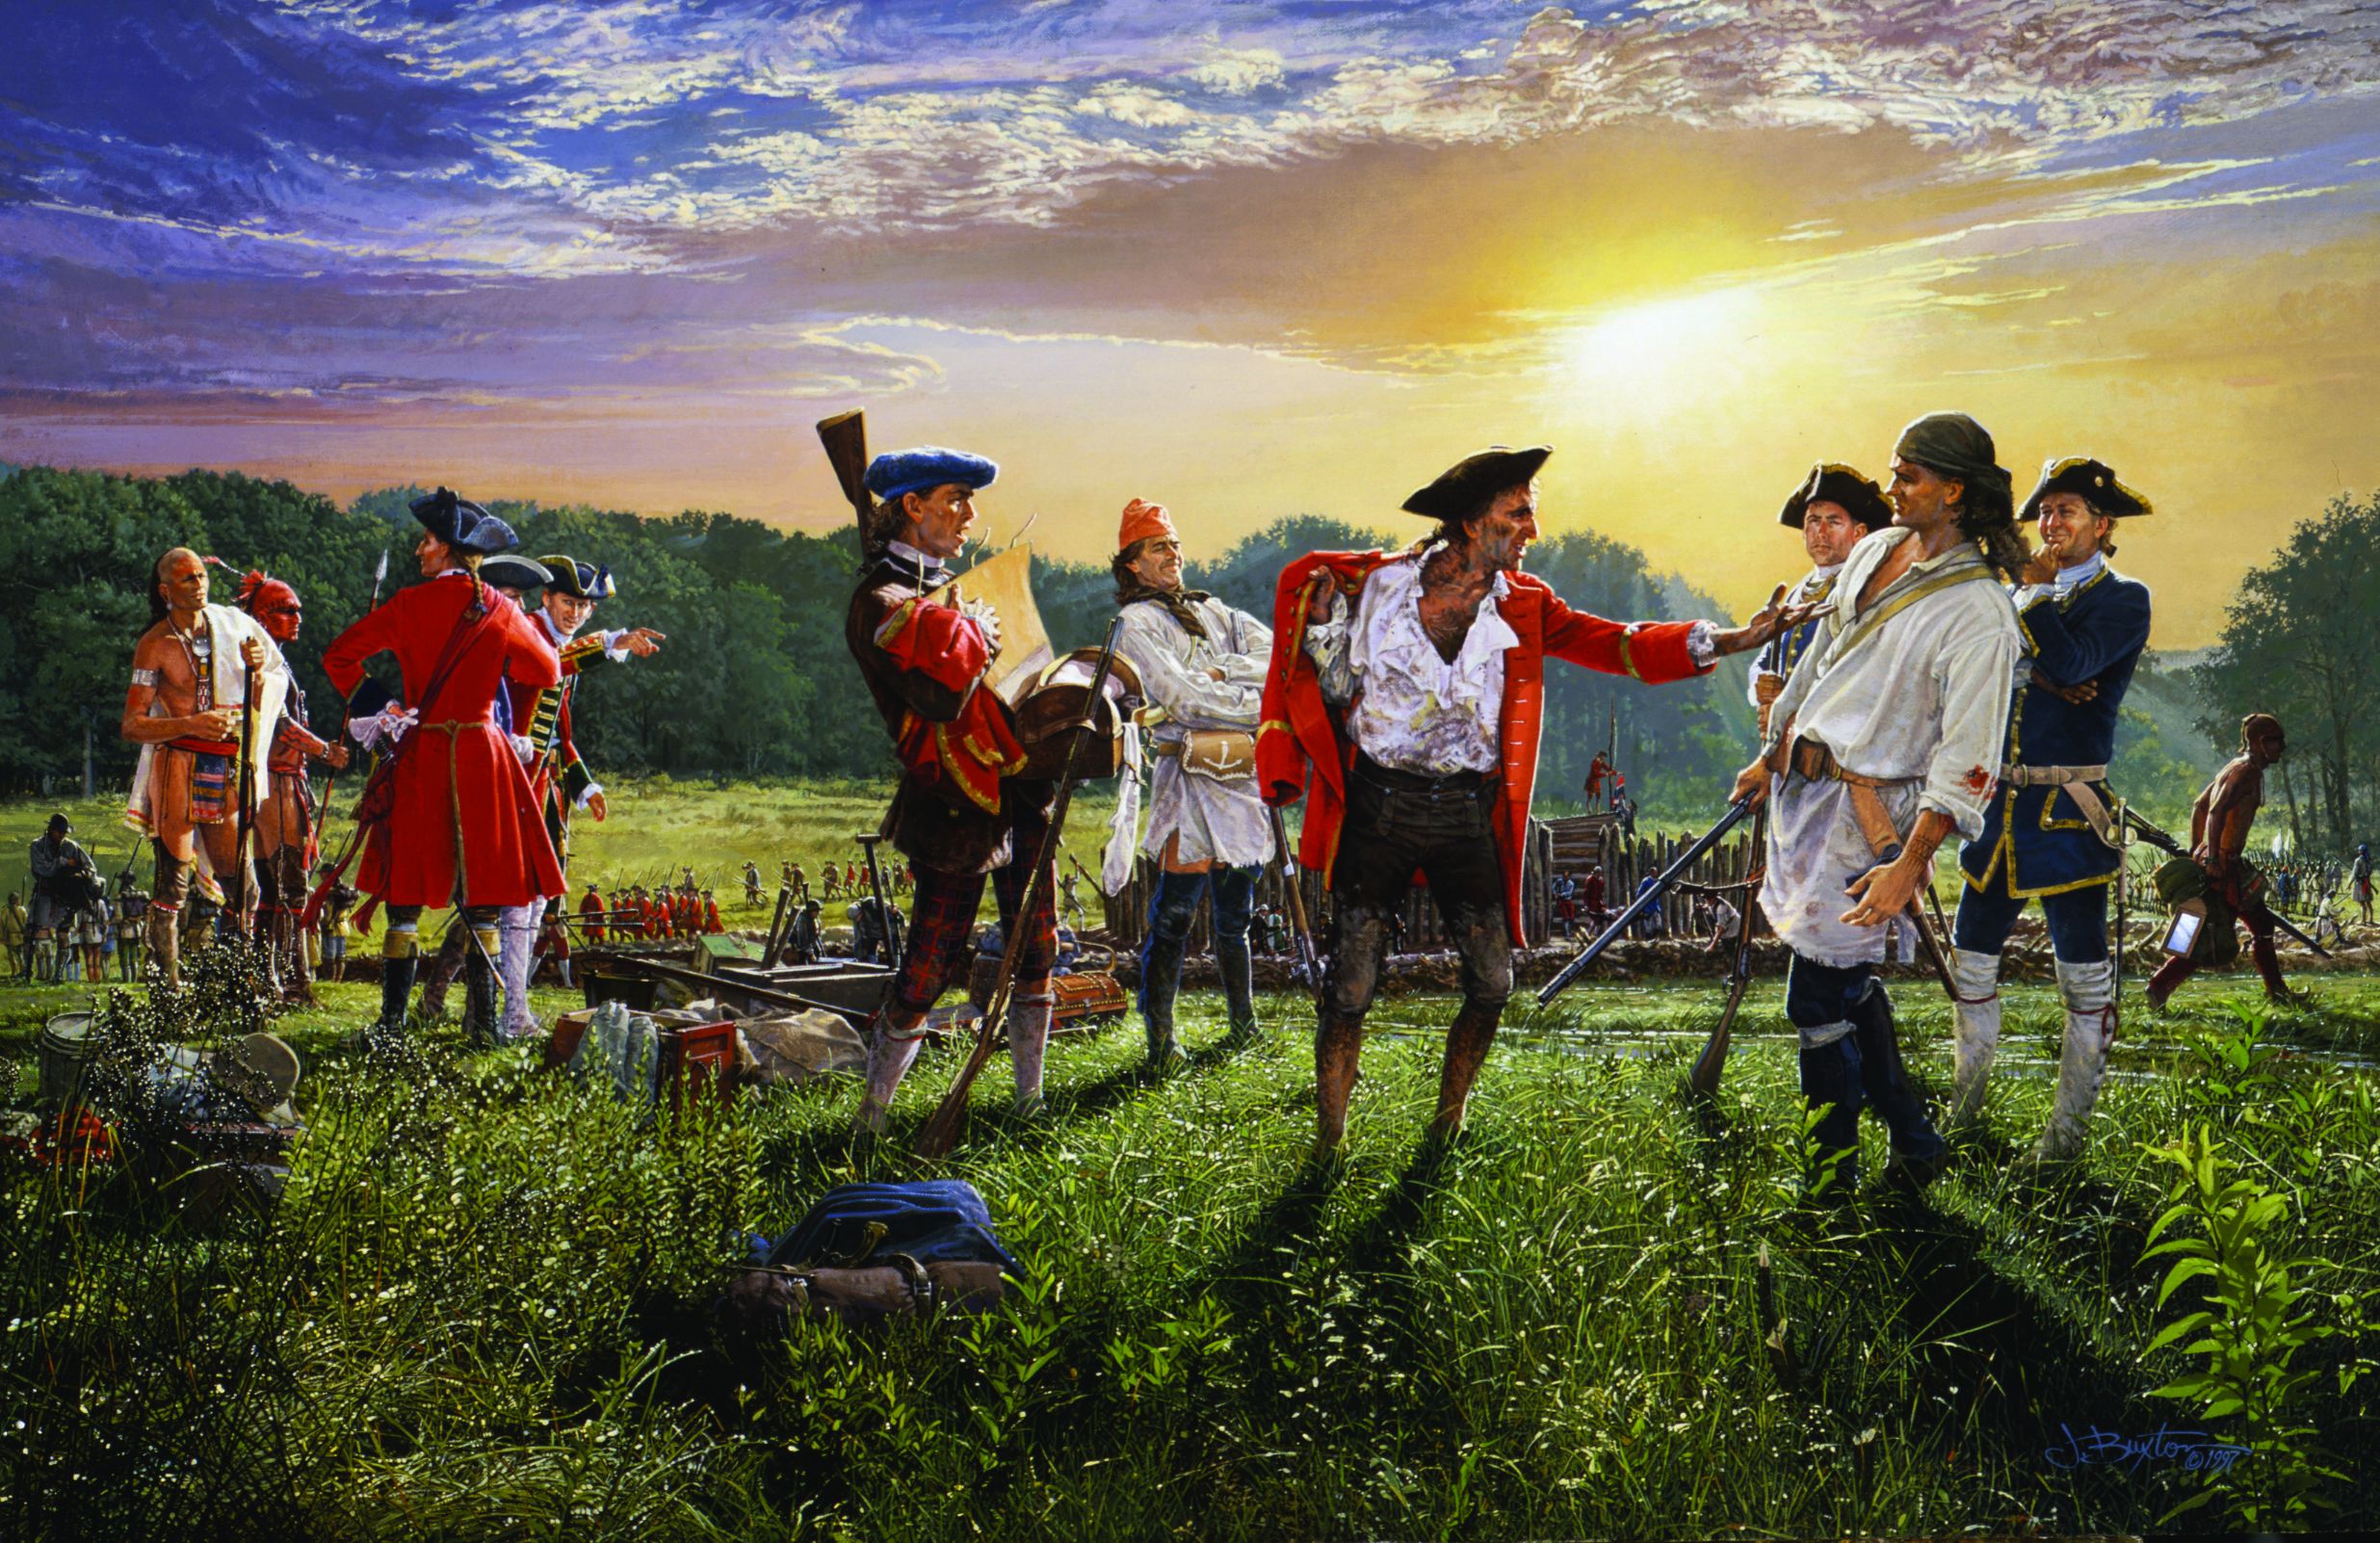 An enraged Major Adam Stephen castigates the Frenchman who was looting his saddlebags after the surrender, in the John Buxton painting, Damn the Capitulation.